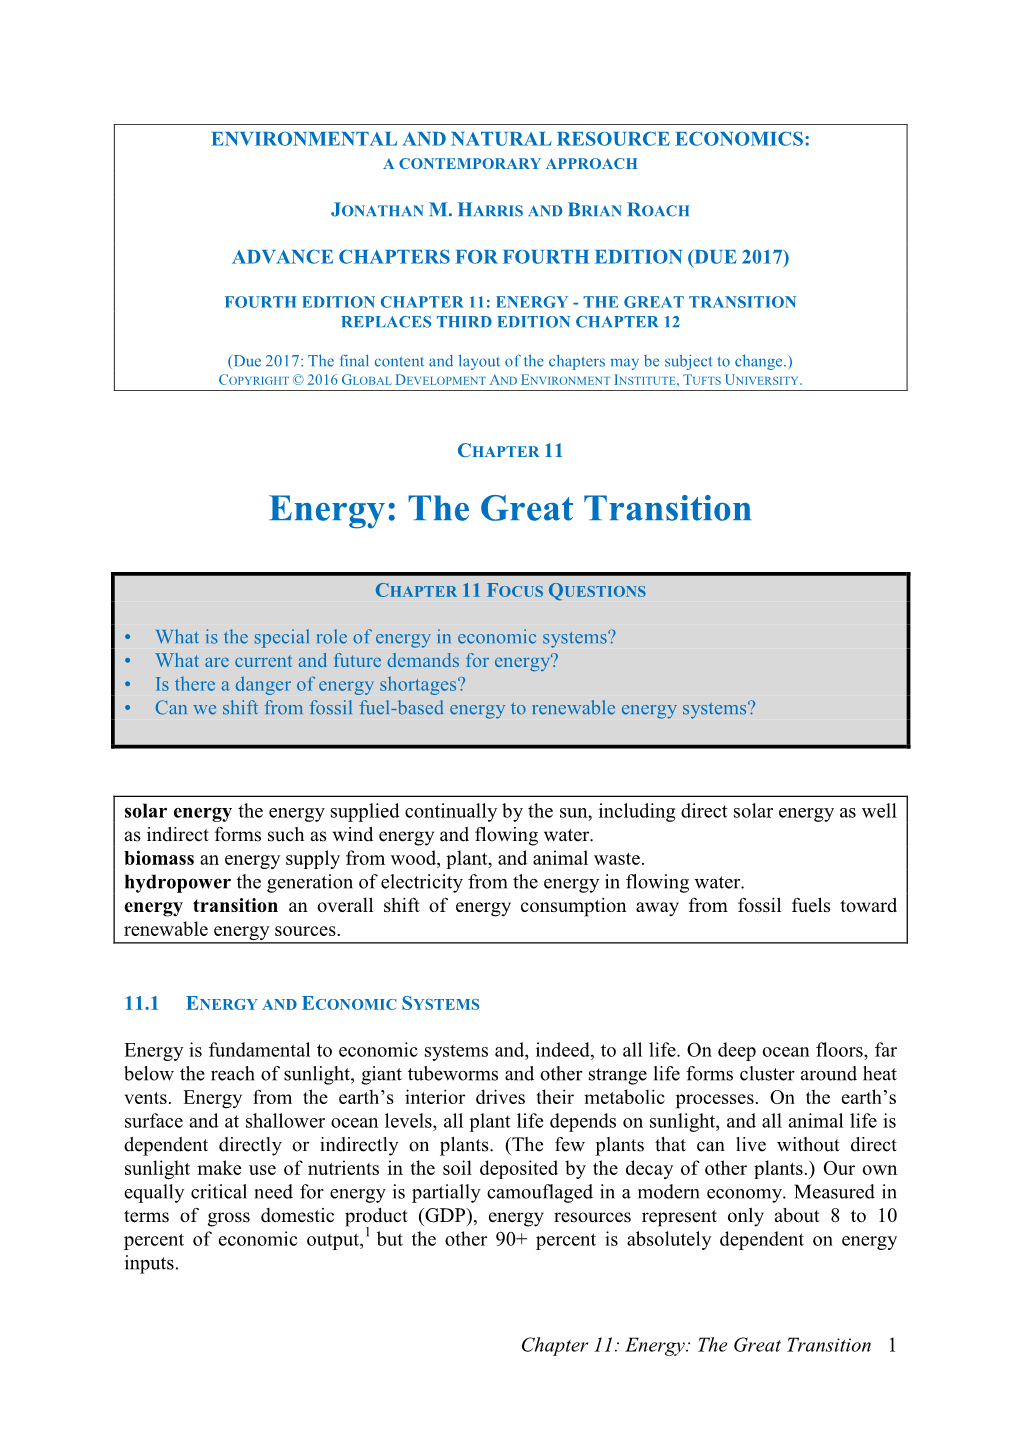 Energy: the Great Transition